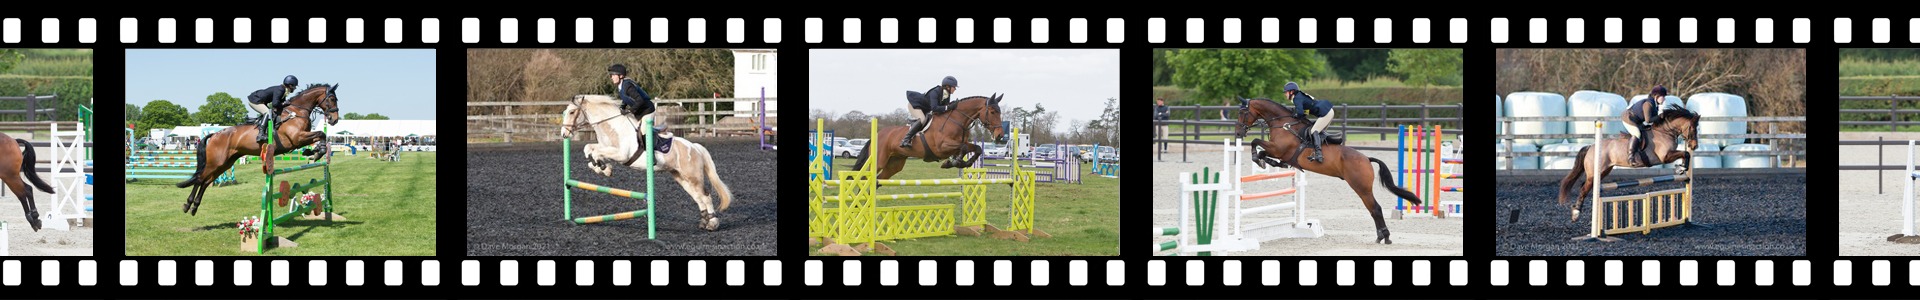 Equines in Action - Show Jumping Header